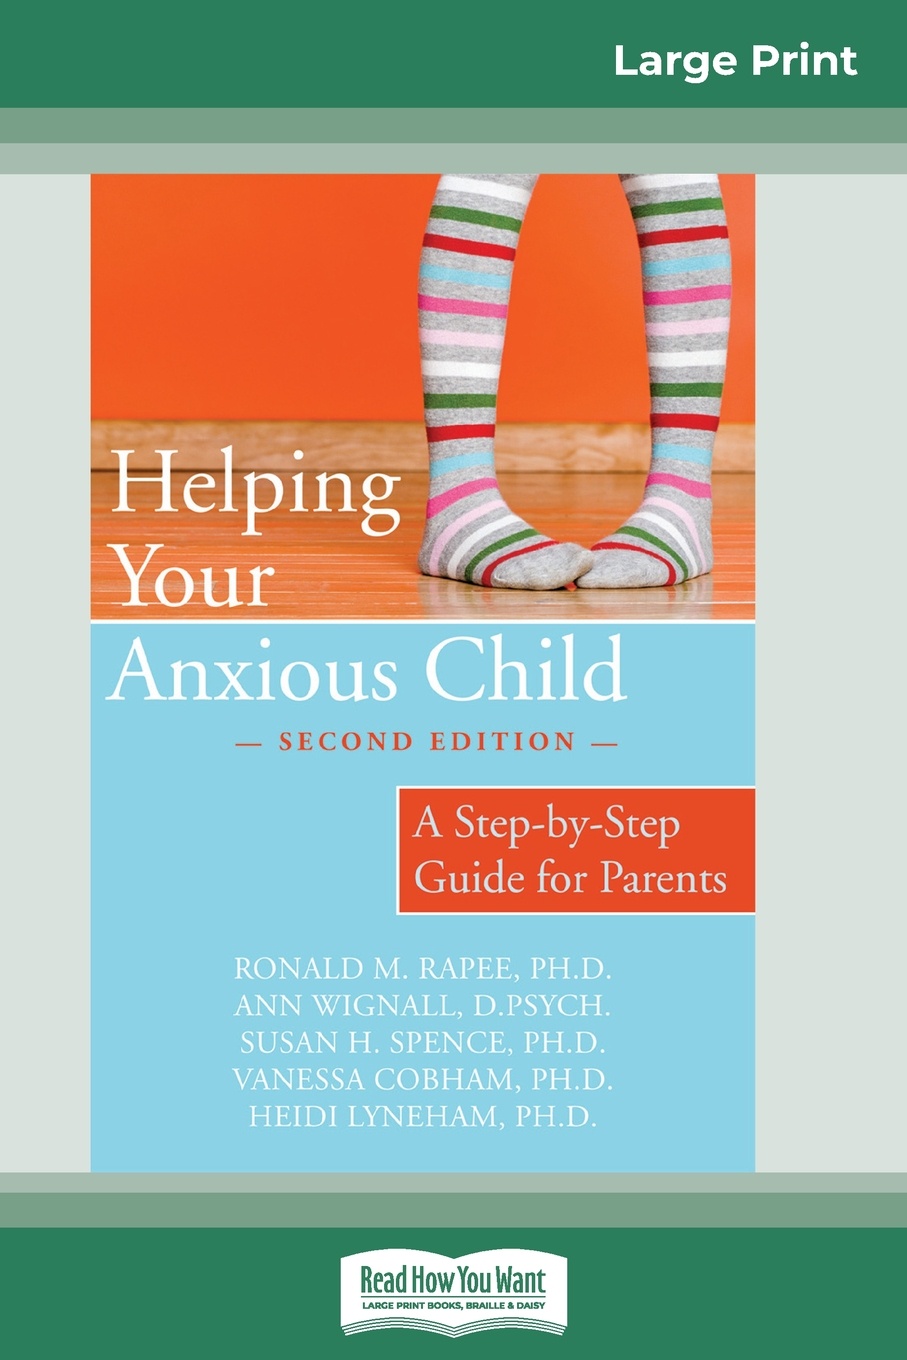 Helping Your Anxious Child. A Step-by-Step Guide for Parents (16pt Large Print Edition)